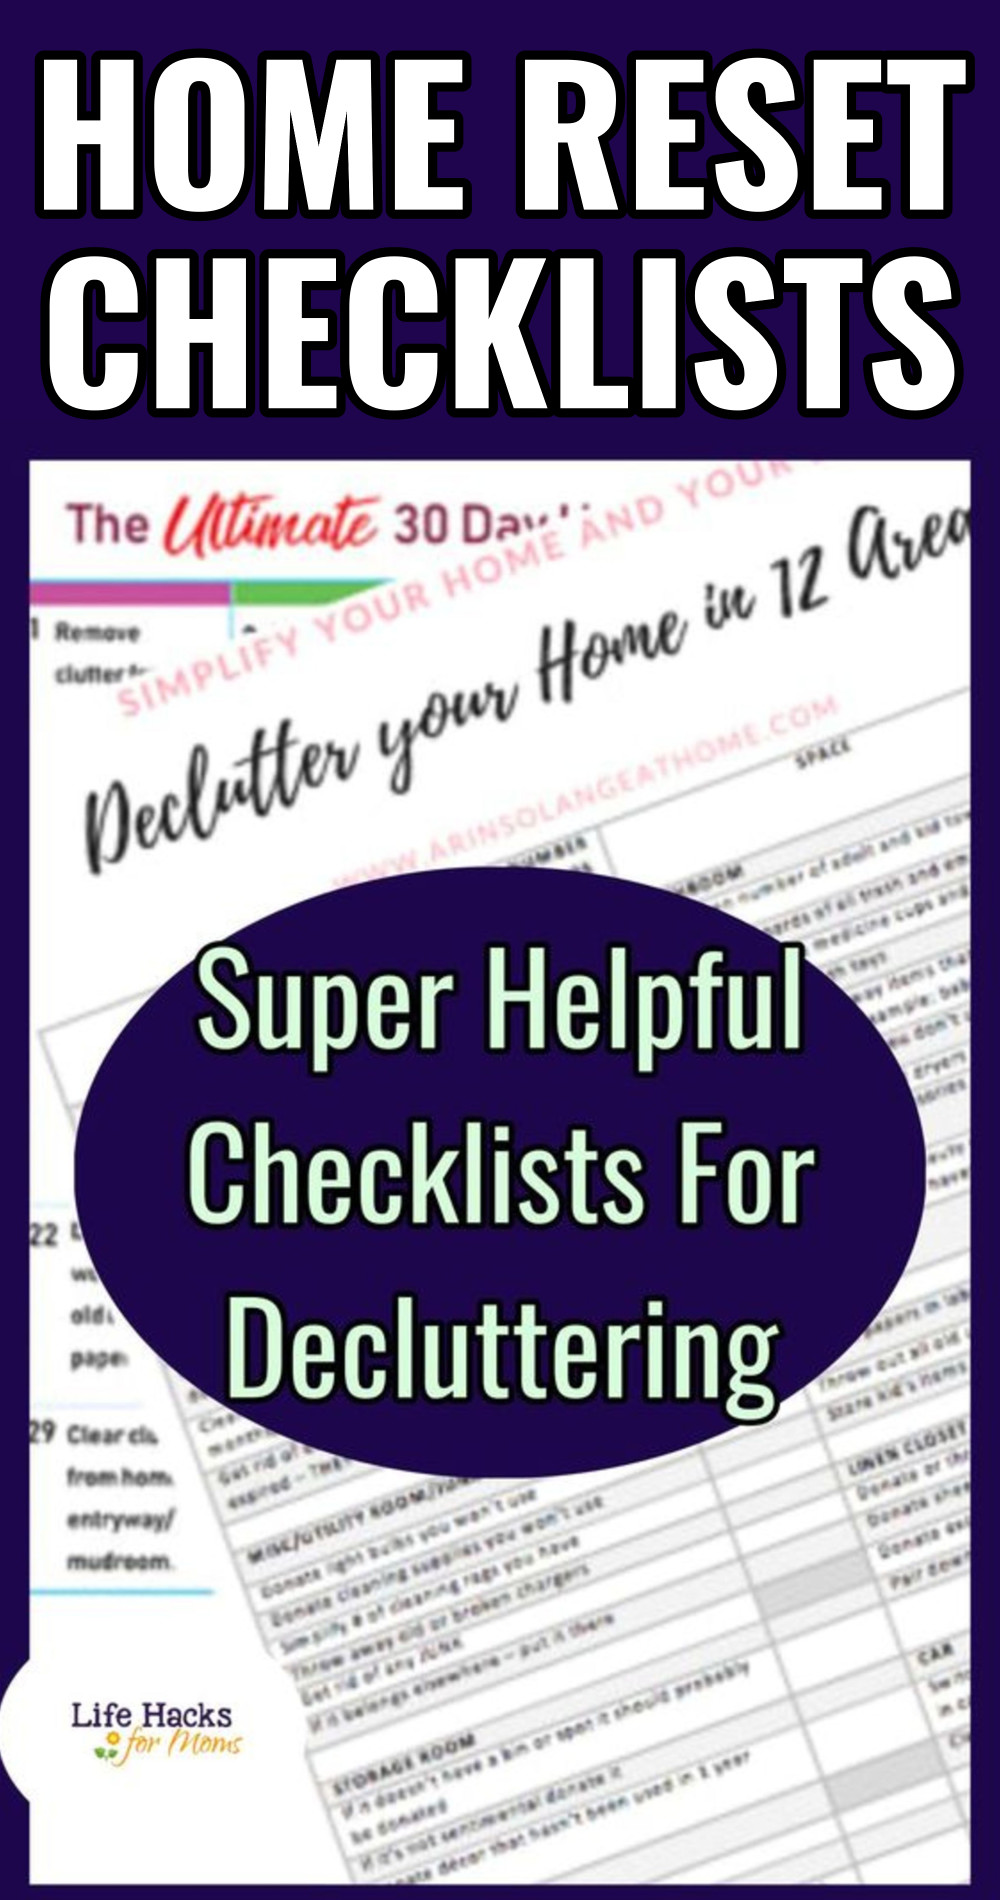 home reset checklists to declutter your home